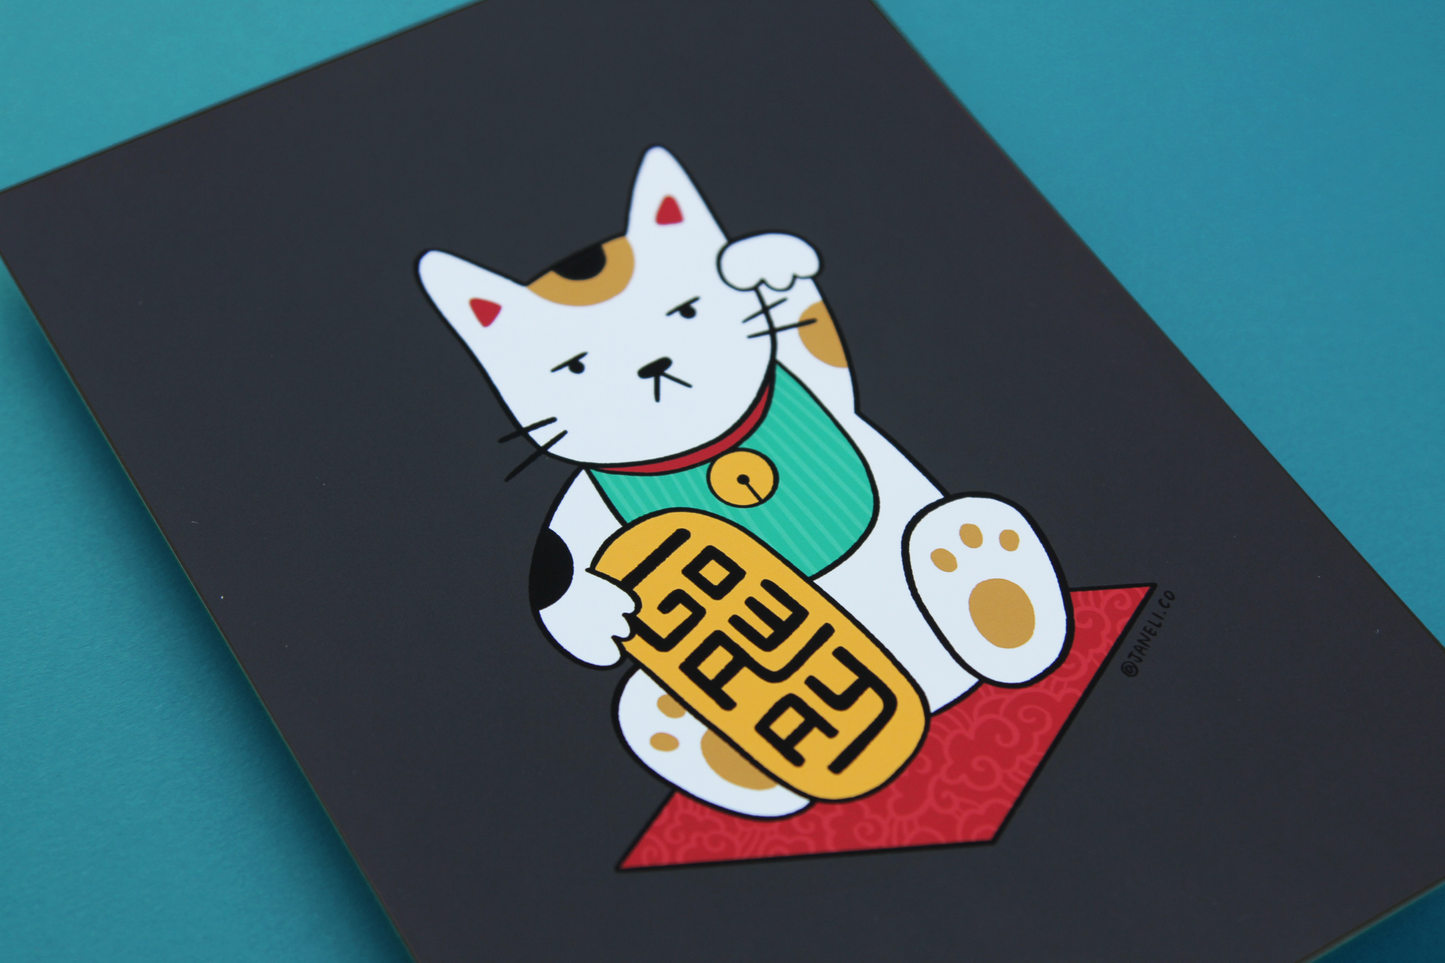 A close up of a JaneLi.Co print that shows a maneki neko cat holding a gold bar that says "Go Away" over a teal background.